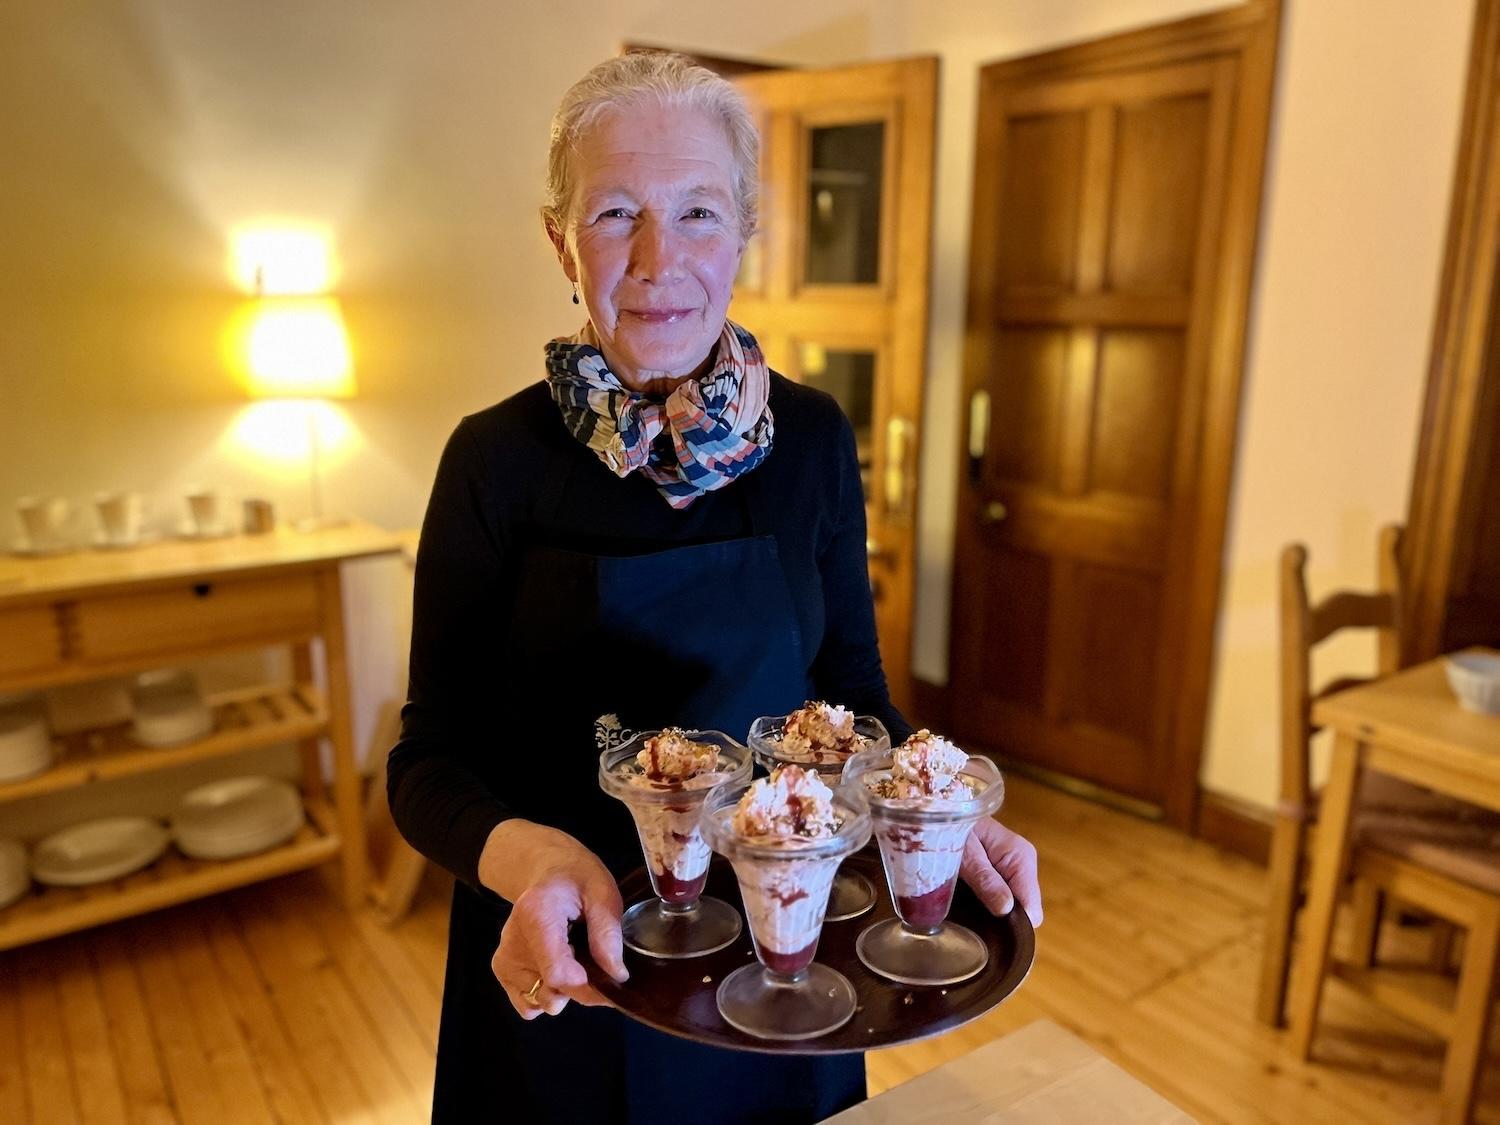 At Coig na Shee guest house in Newtonmore, Marion Broad serves a traditional Scottish dessert called cranachan that's made of oats, cream, whisky and raspberries.